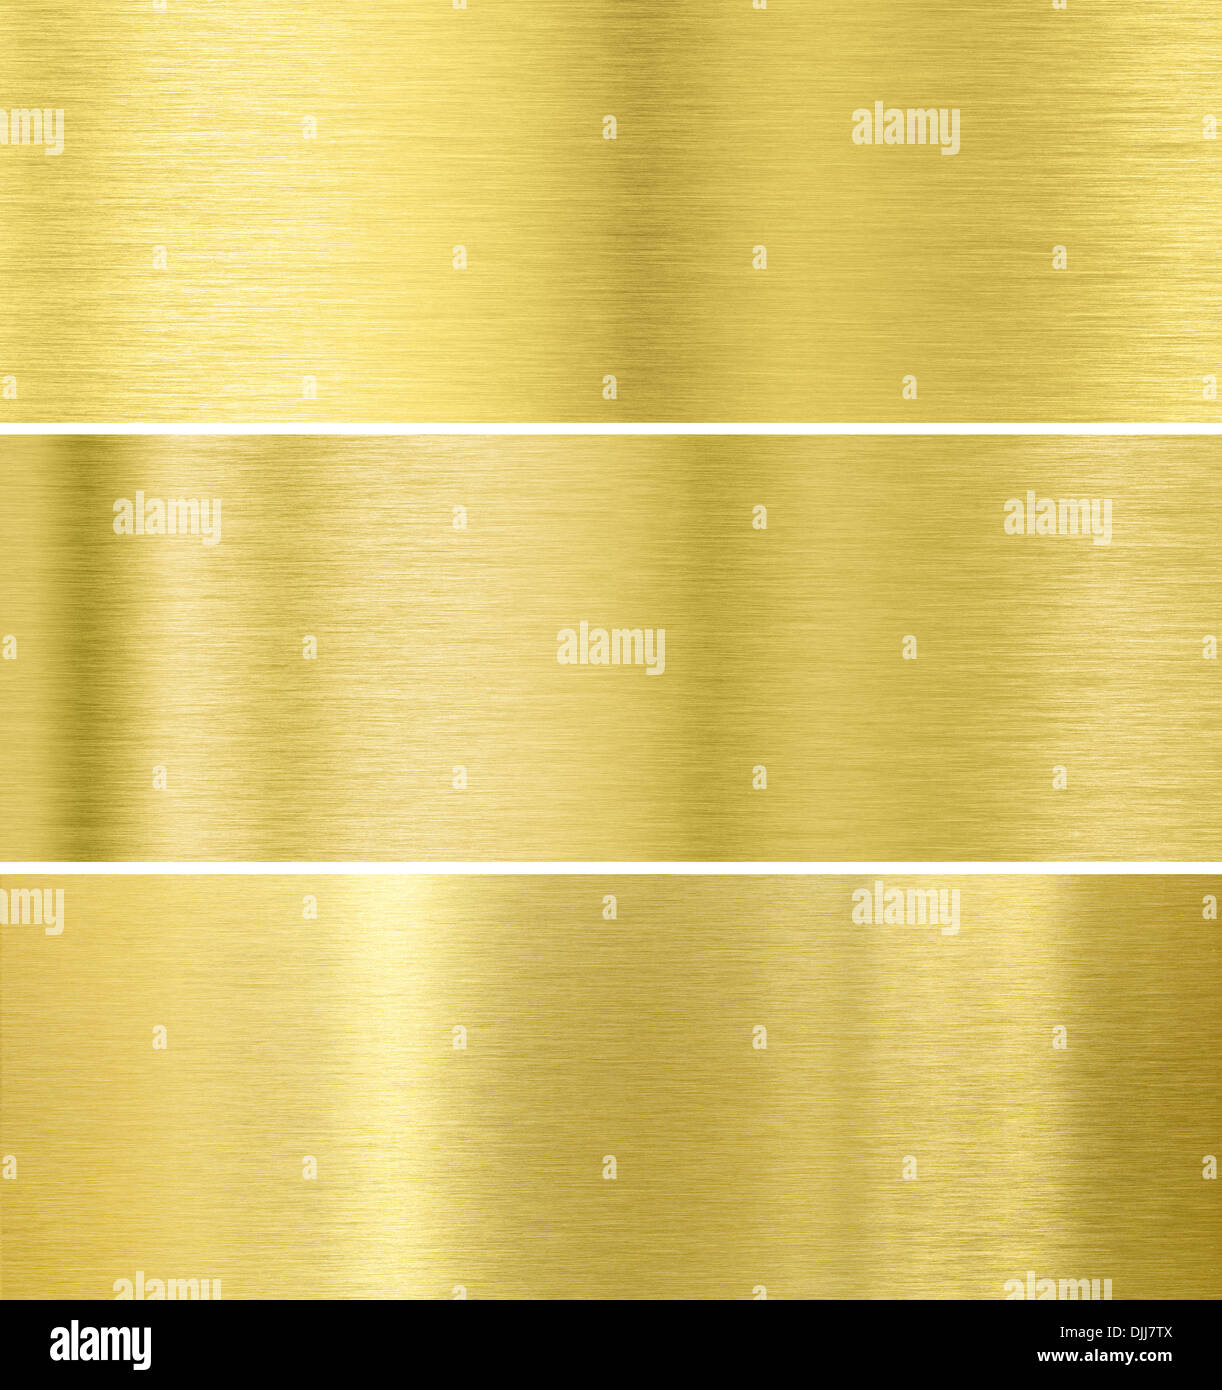 Gold metal texture background collection Stock Photo